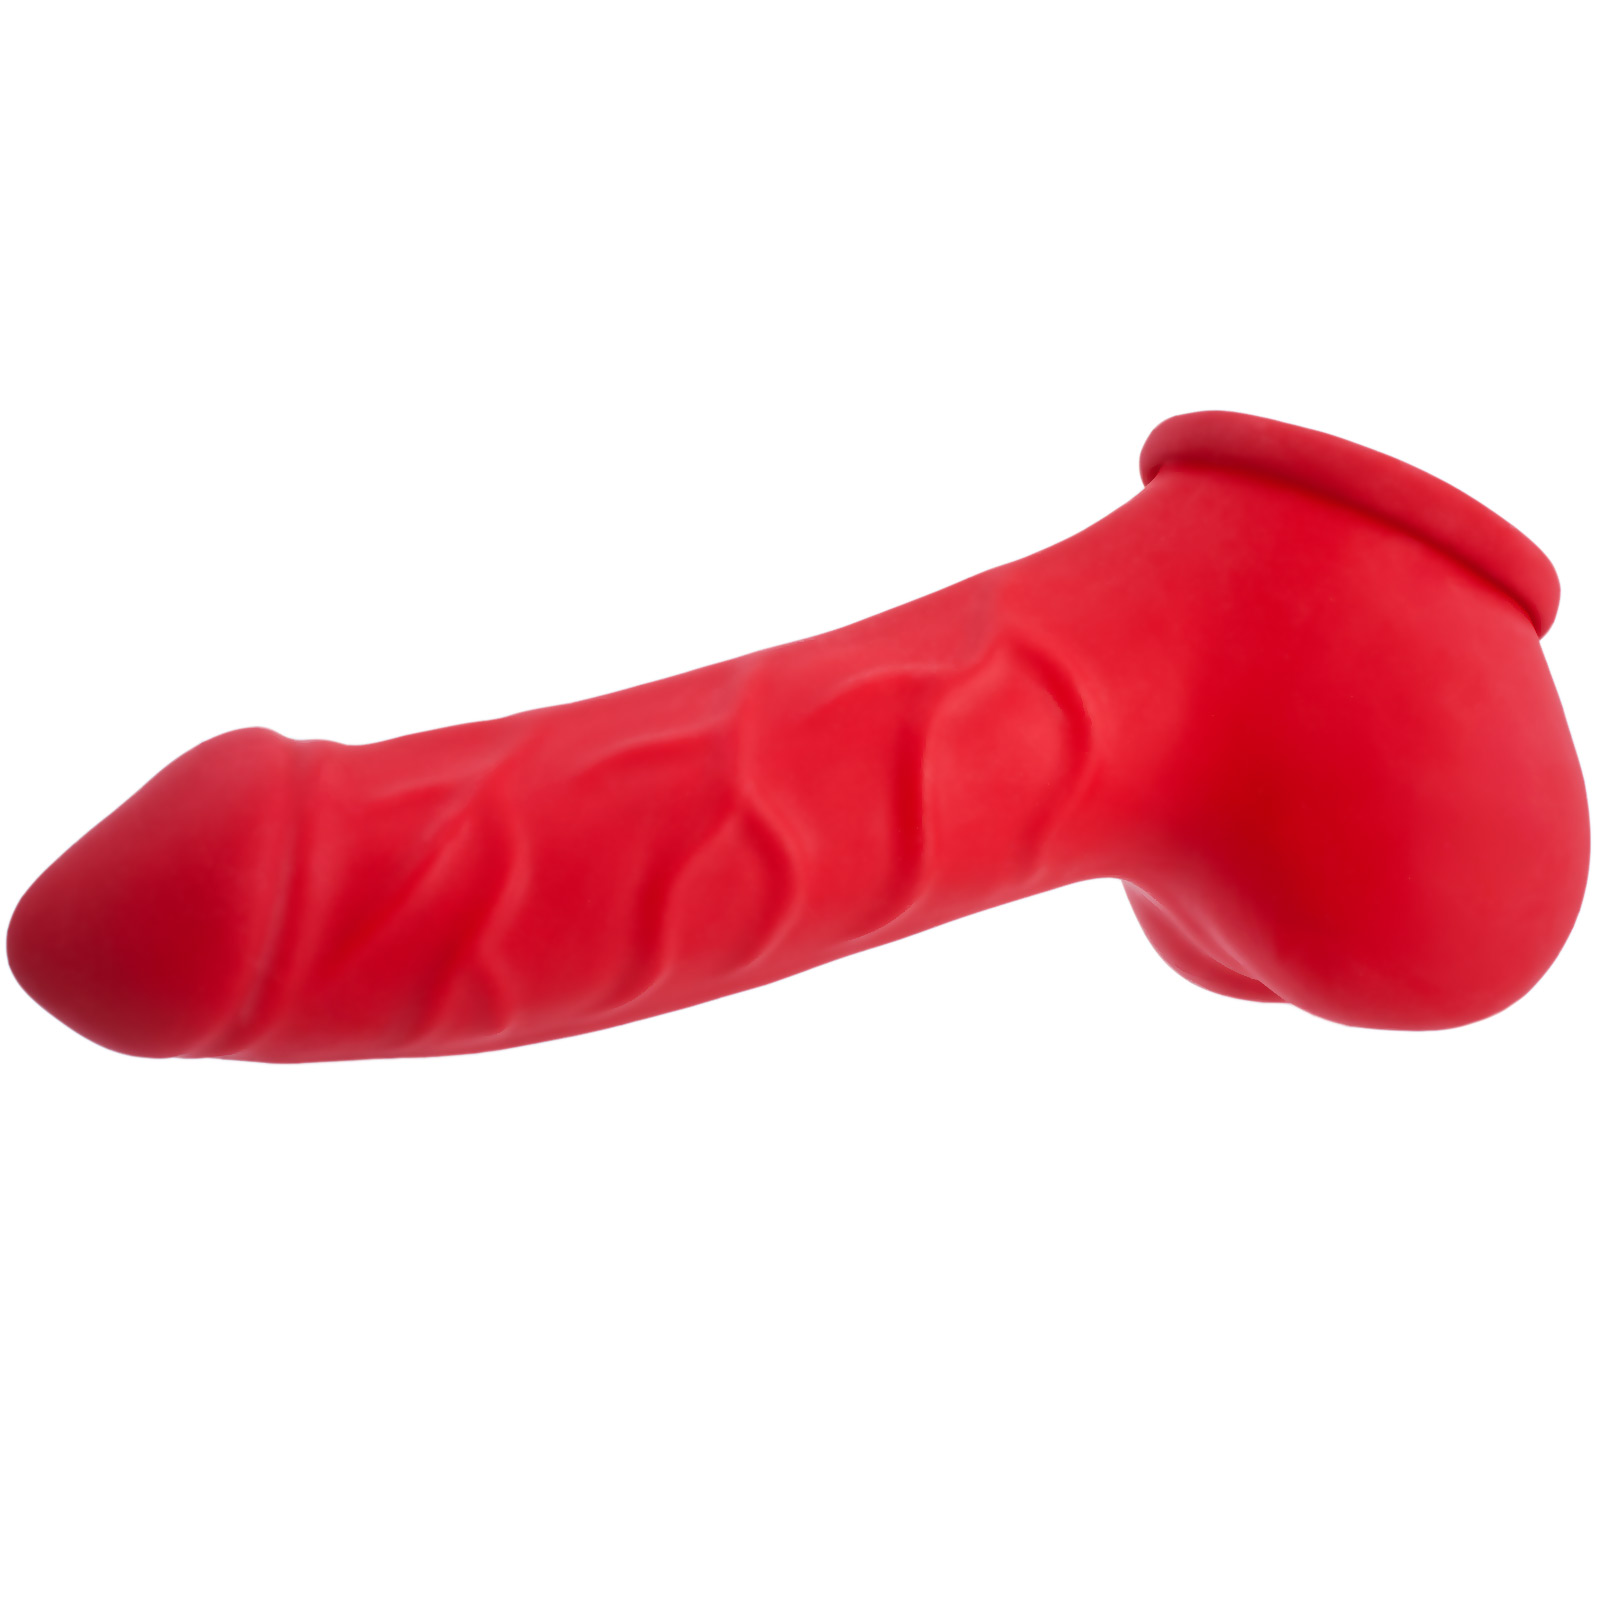 Toylie Latex Penis Sleeve «CARLOS» red, with strong veins and molded scrotum